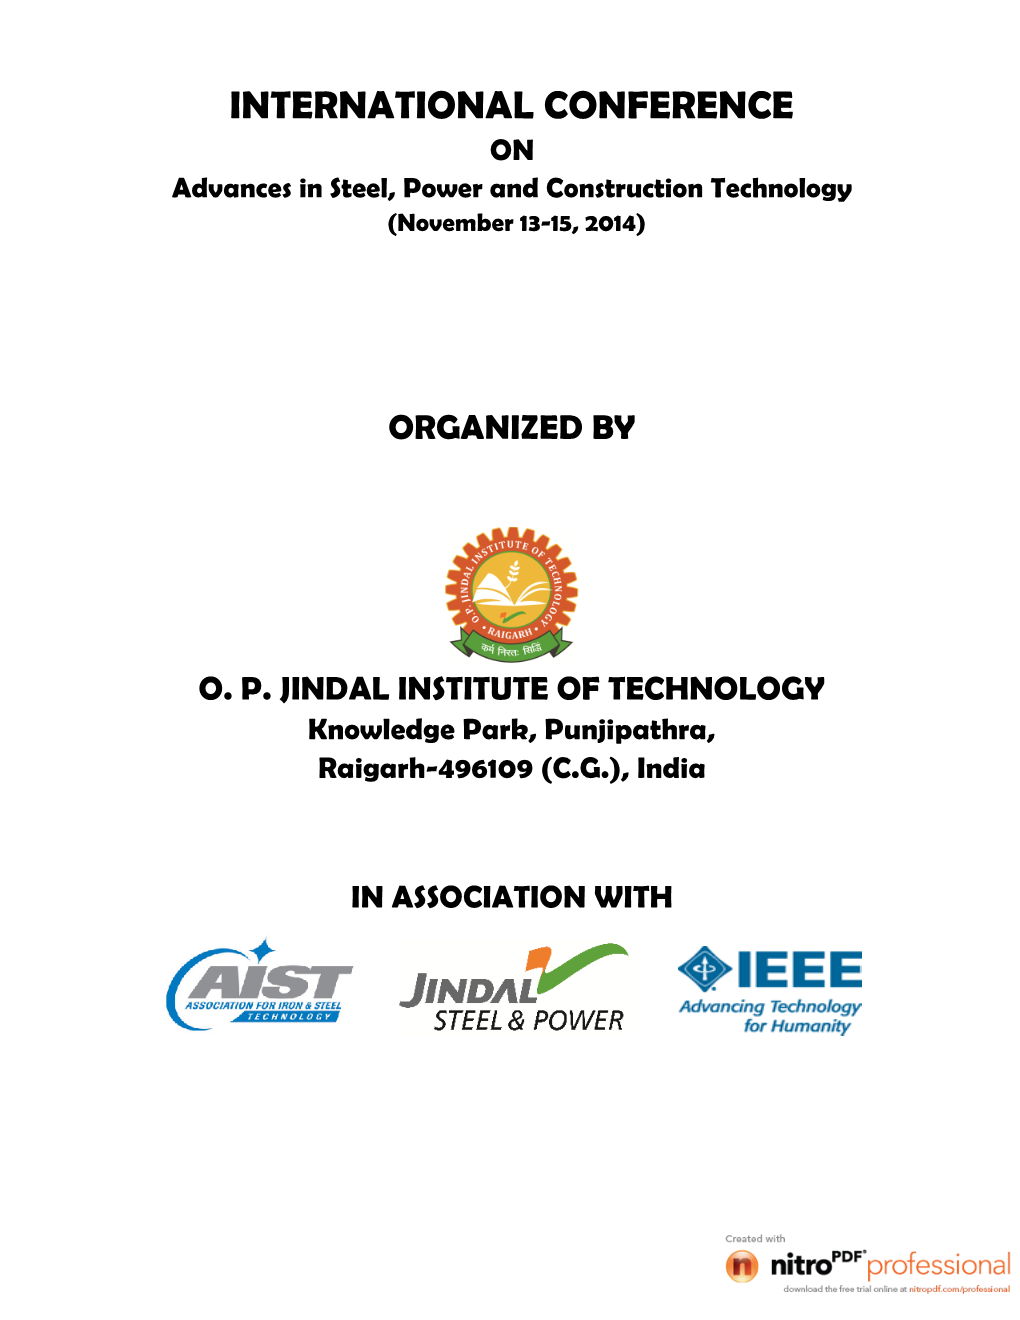 INTERNATIONAL CONFERENCE on Advances in Steel, Power and Construction Technology (November 13-15, 2014)